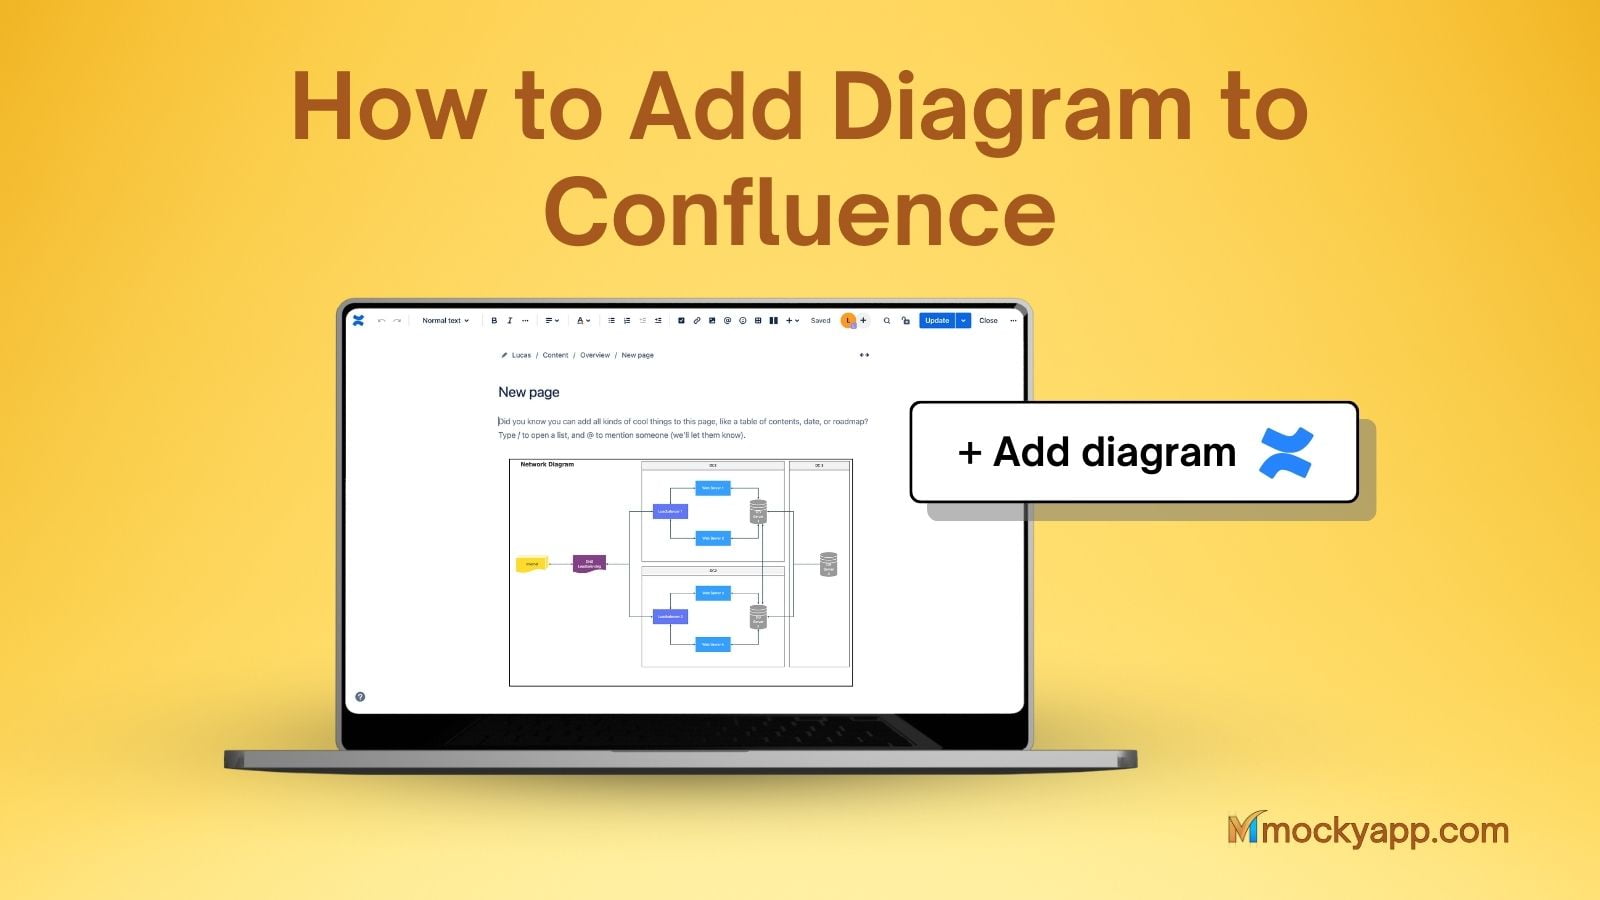 How to Add Diagram to Confluence page easily